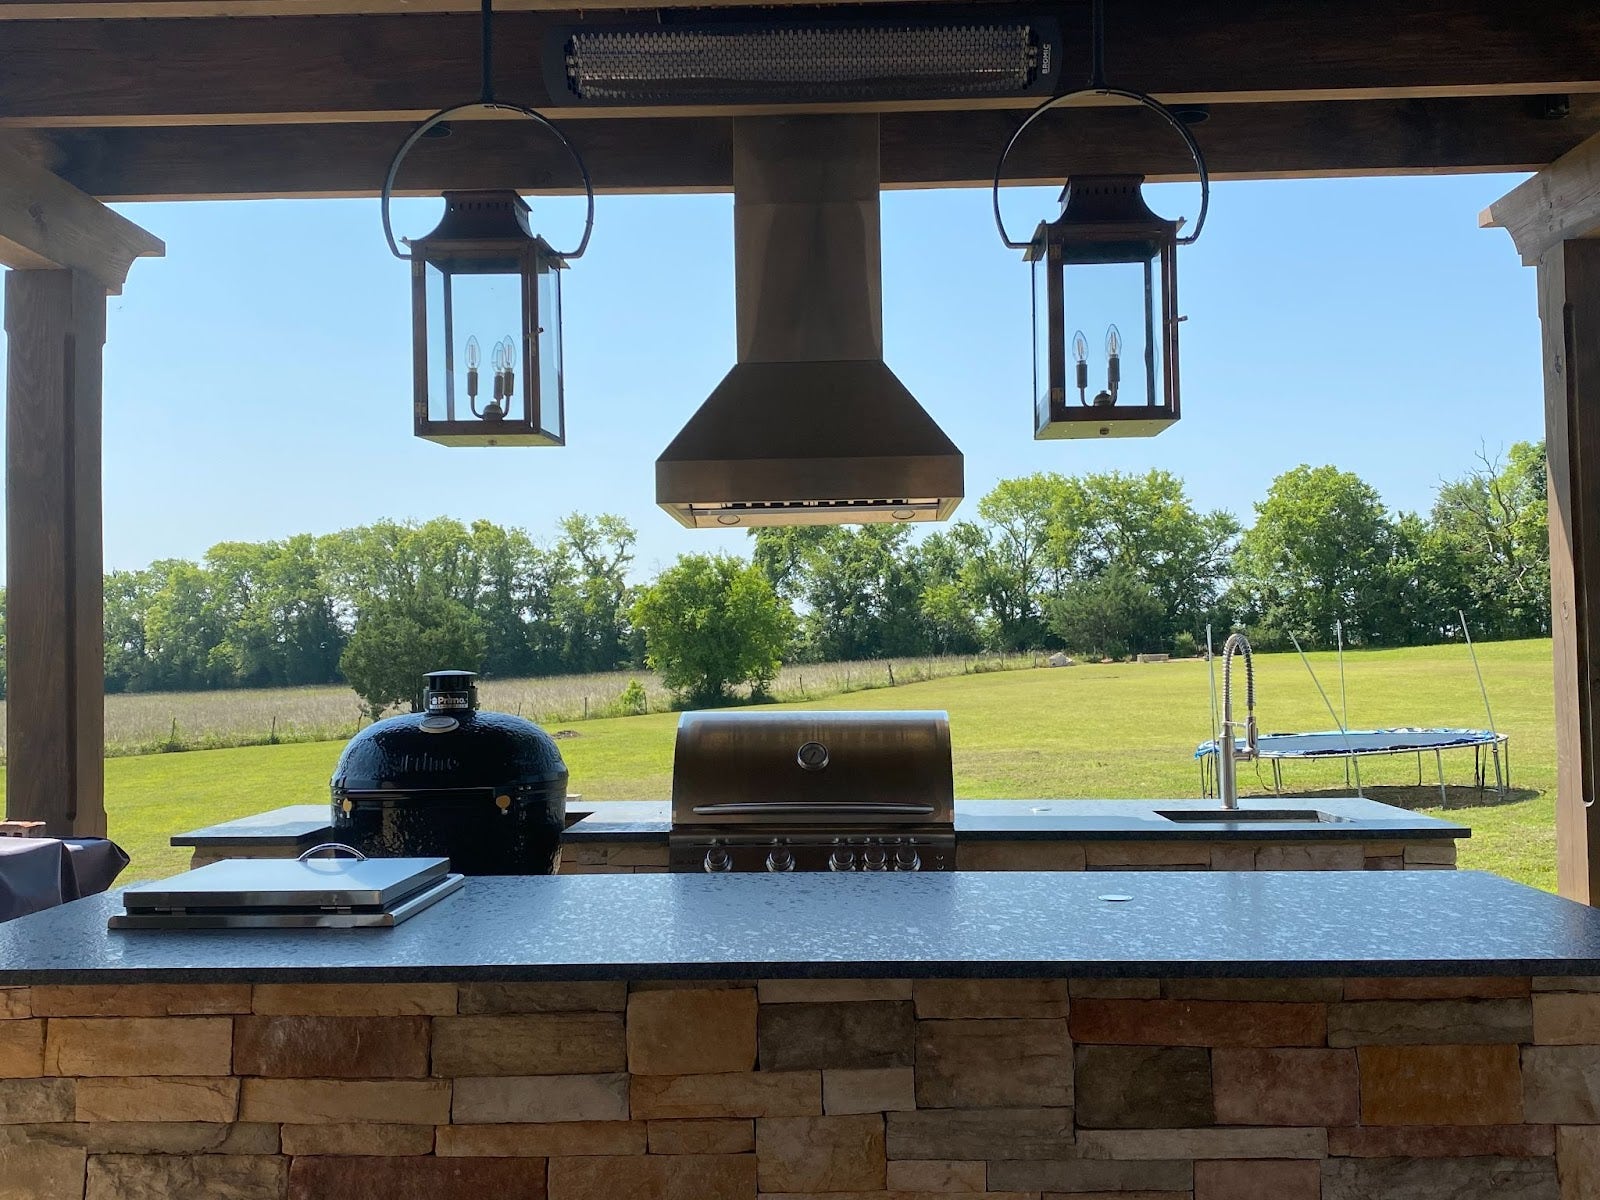 Open-air cooking area featuring a charcoal smoker, built-in gas grill, and farmhouse-style lanterns, set against the backdrop of a lush field and blue skies. - Proline Range Hoods - prolinerangehoods.com 